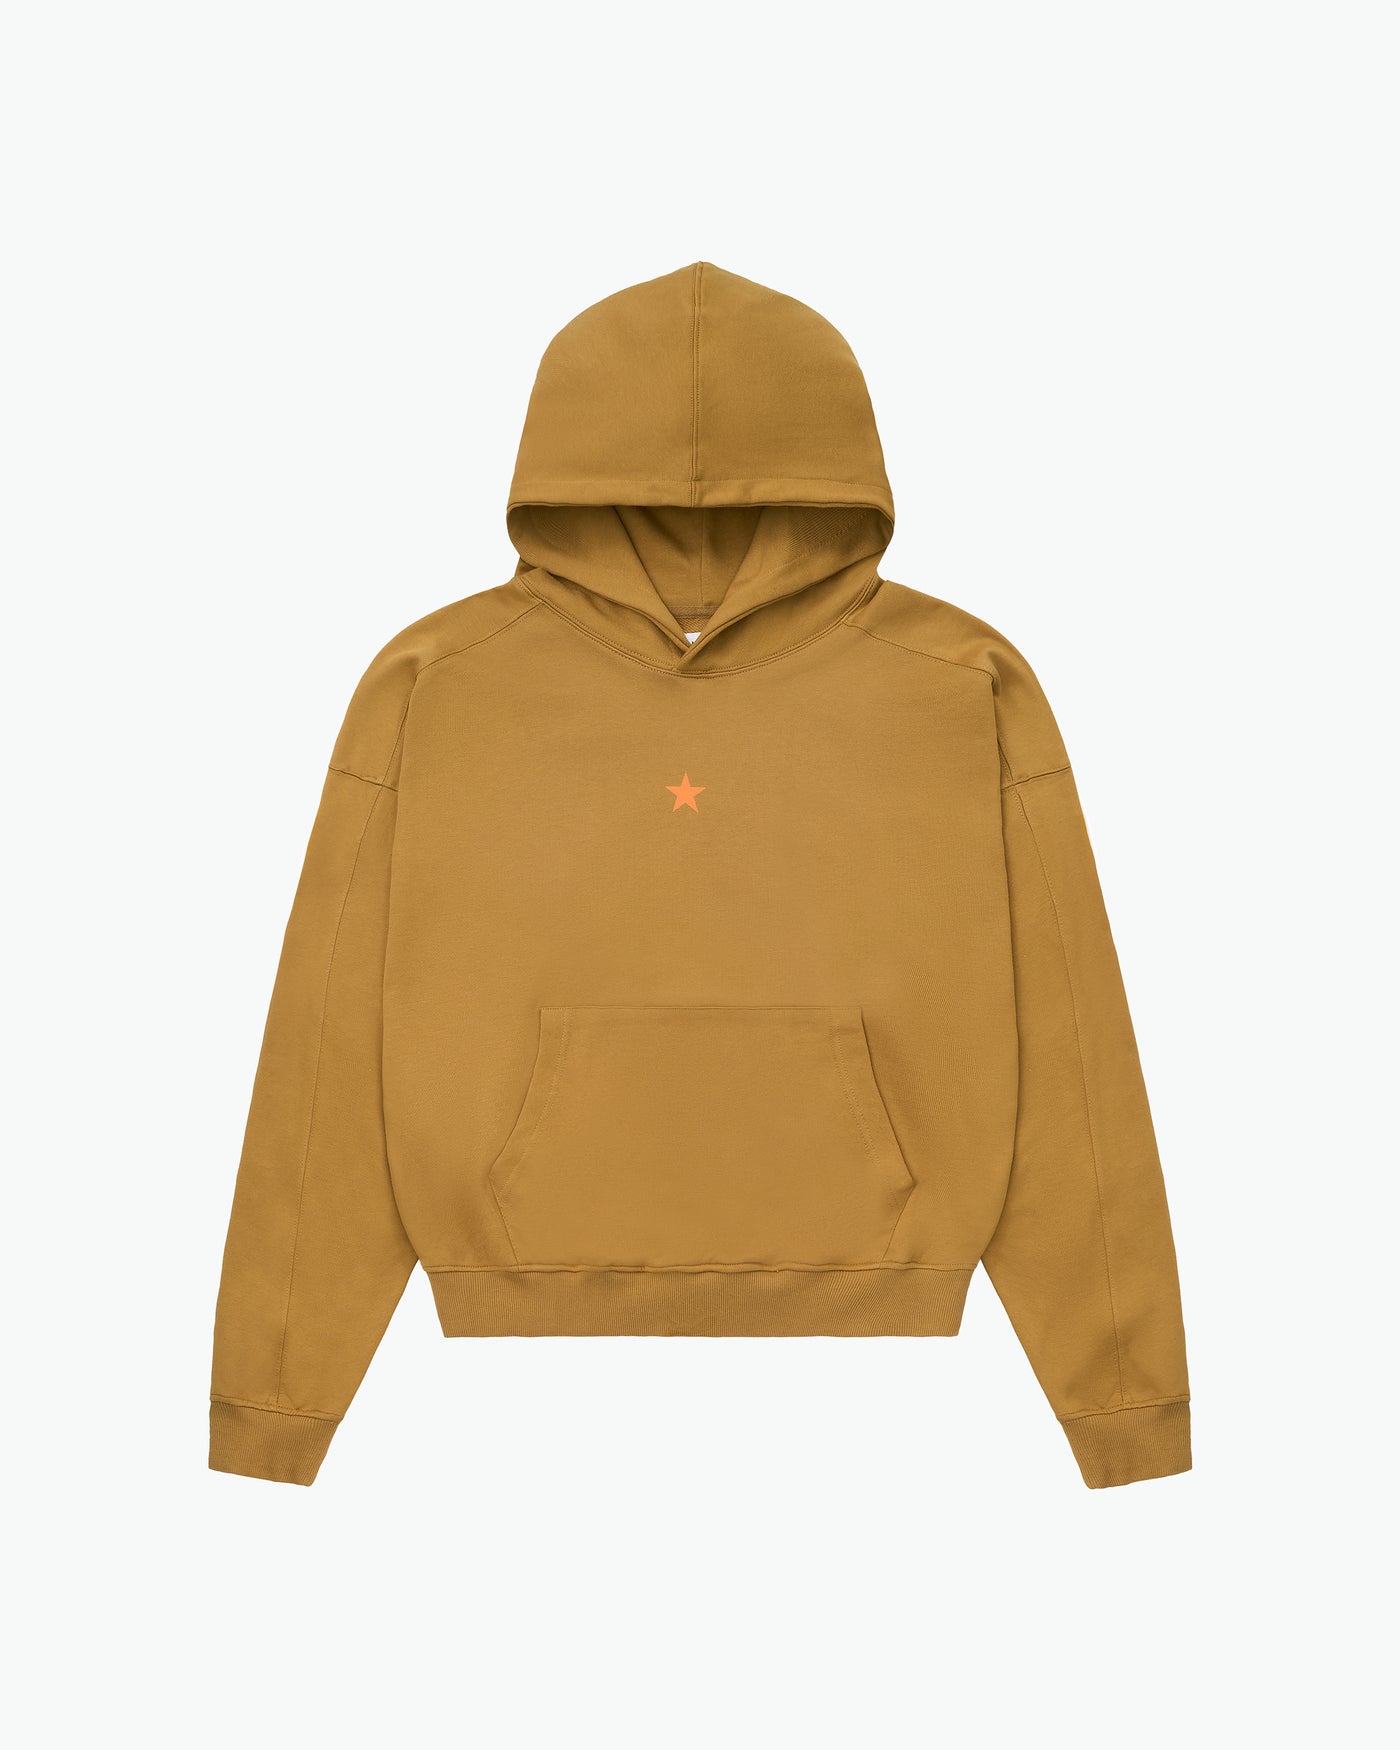 The Search Of Adventure  Heavyweight Hoodie / Gold